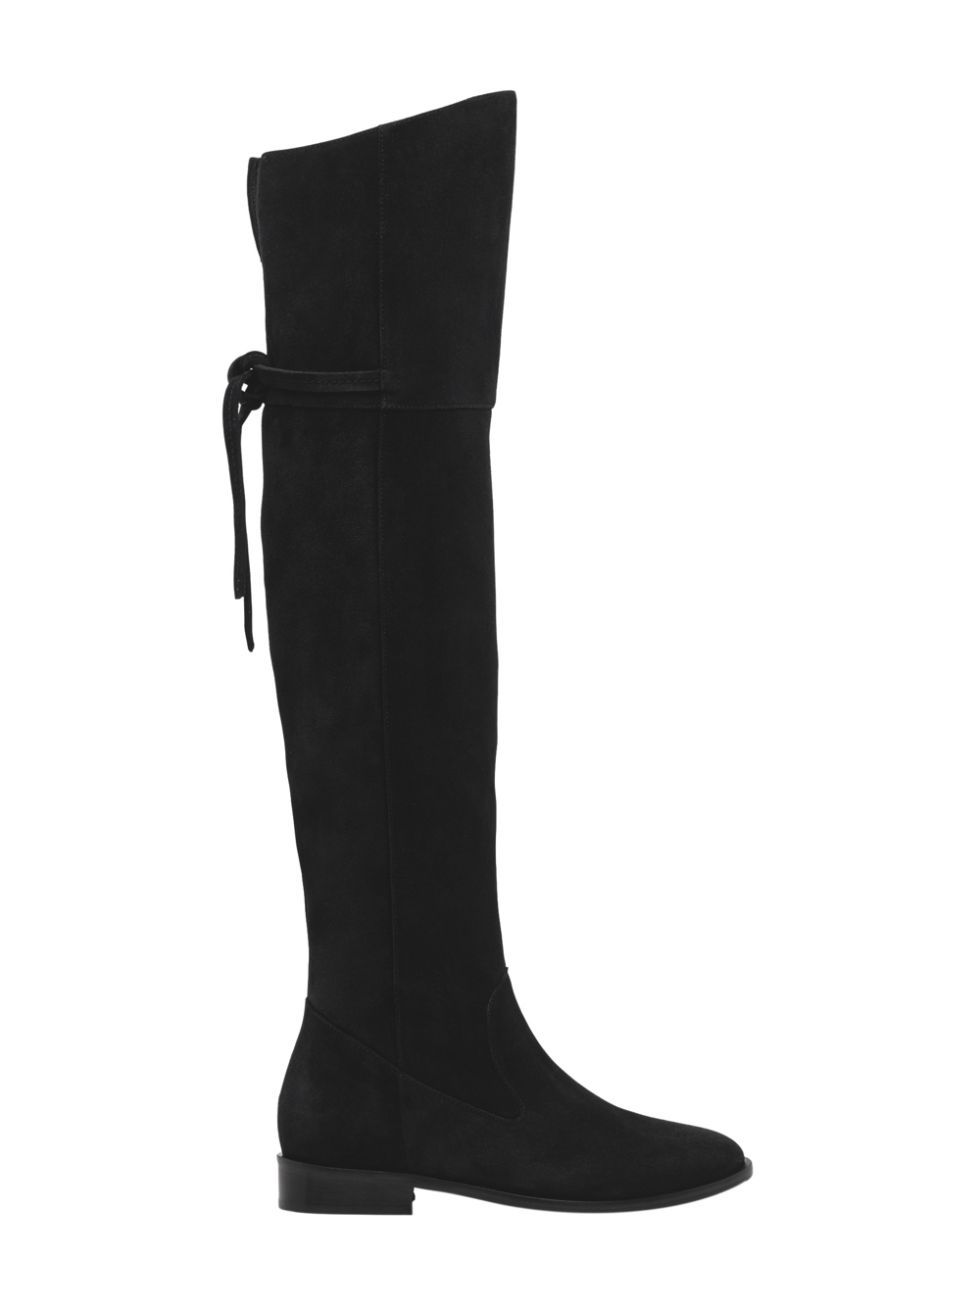 Footwear, Boot, Knee-high boot, Shoe, Riding boot, Suede, Leather, Durango boot, High heels, 